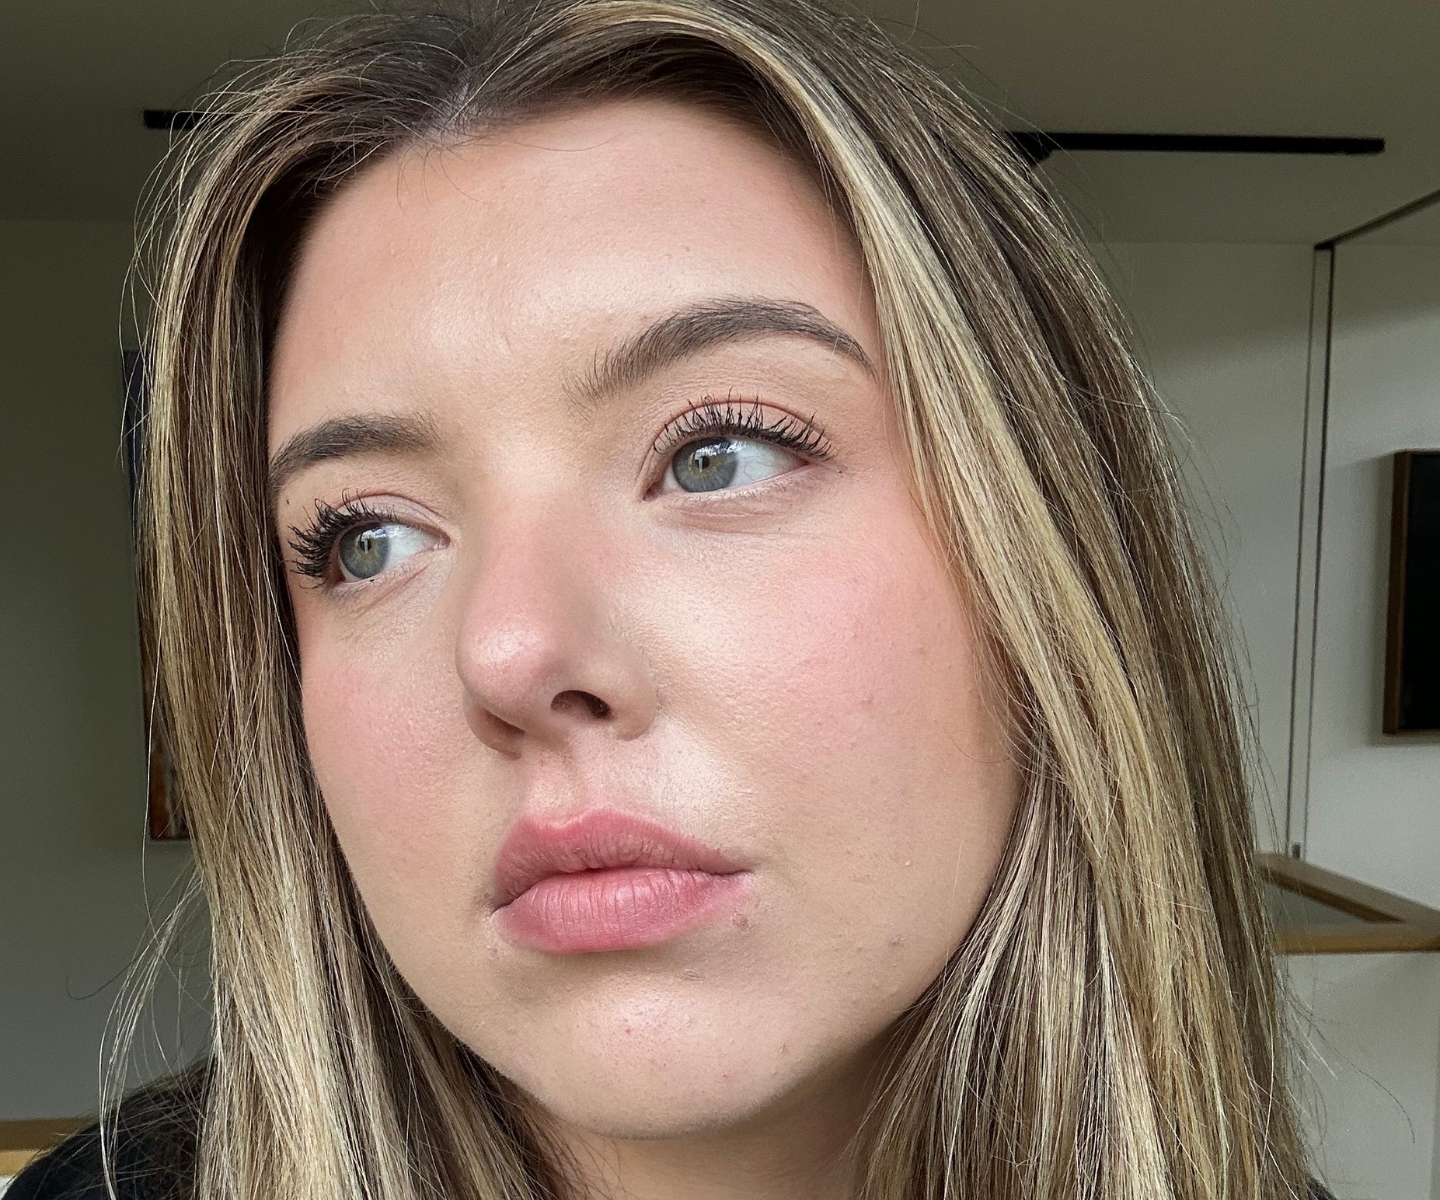 Maybelline Skin Tint Maddy selfie in-article